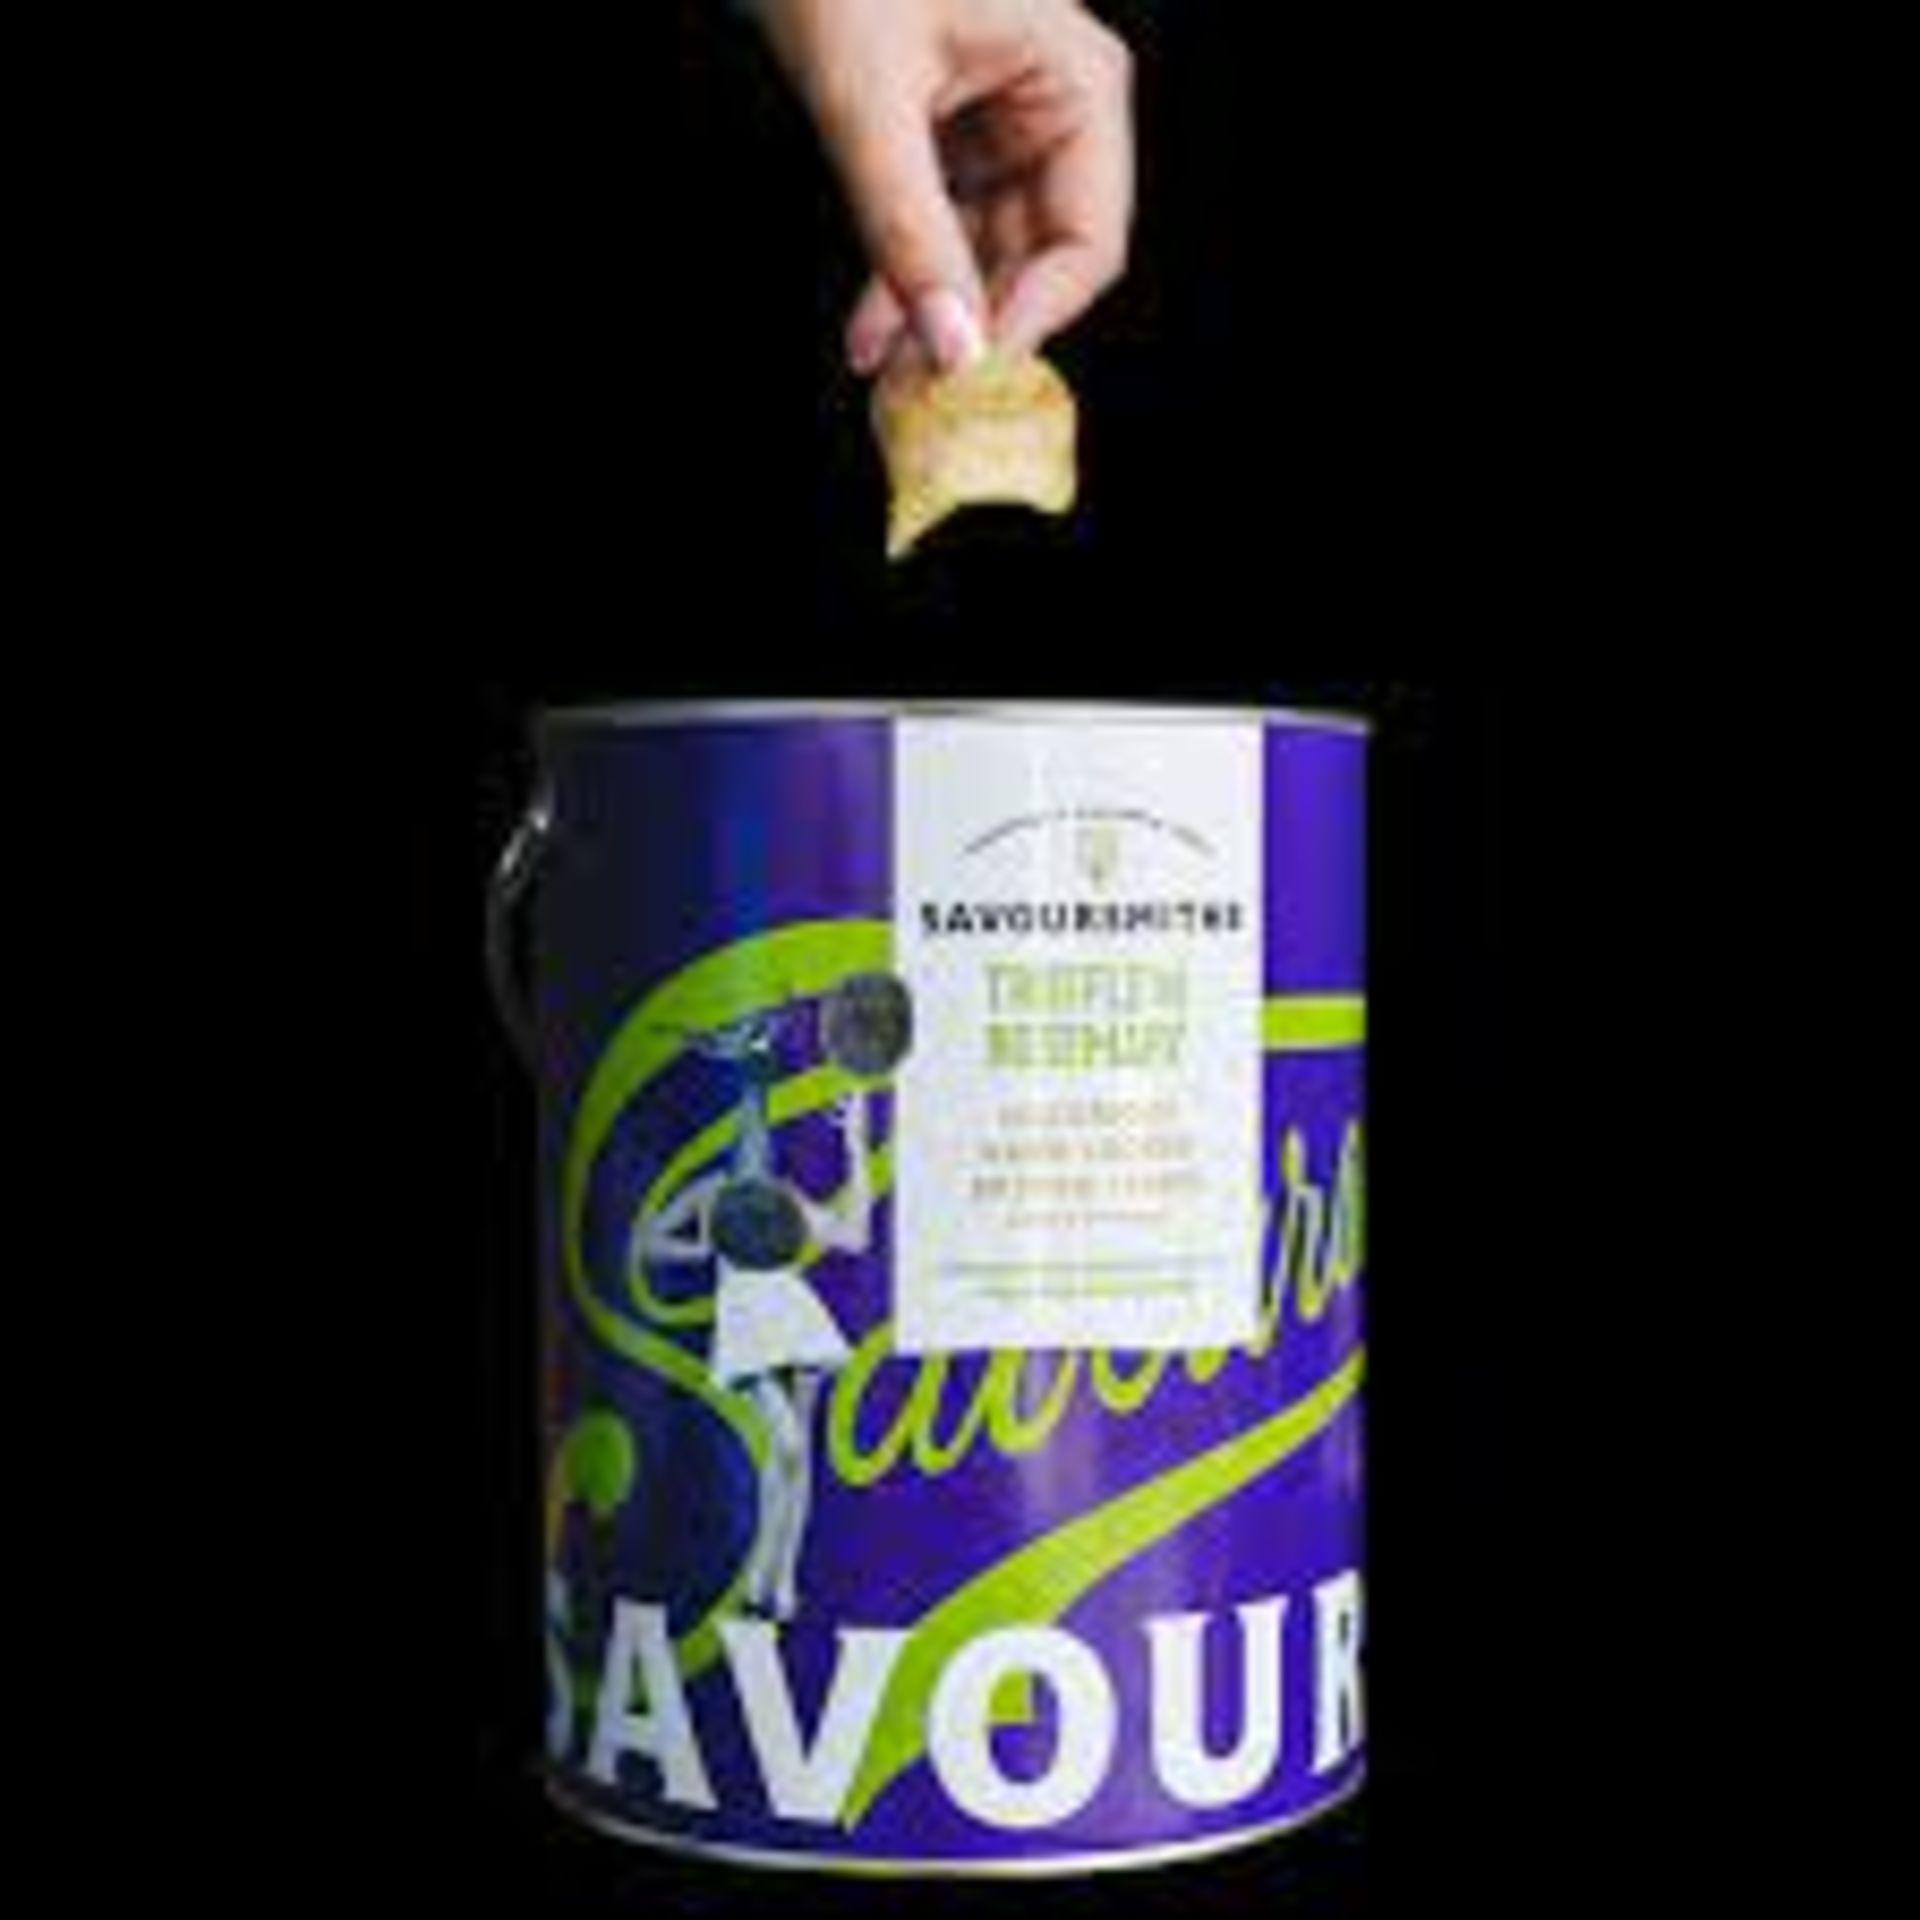 RRP £262 (Approx. Count 28) spW57n5883J 20 x Savoursmiths Truffle and Rosemary Flavour Potato Crisps